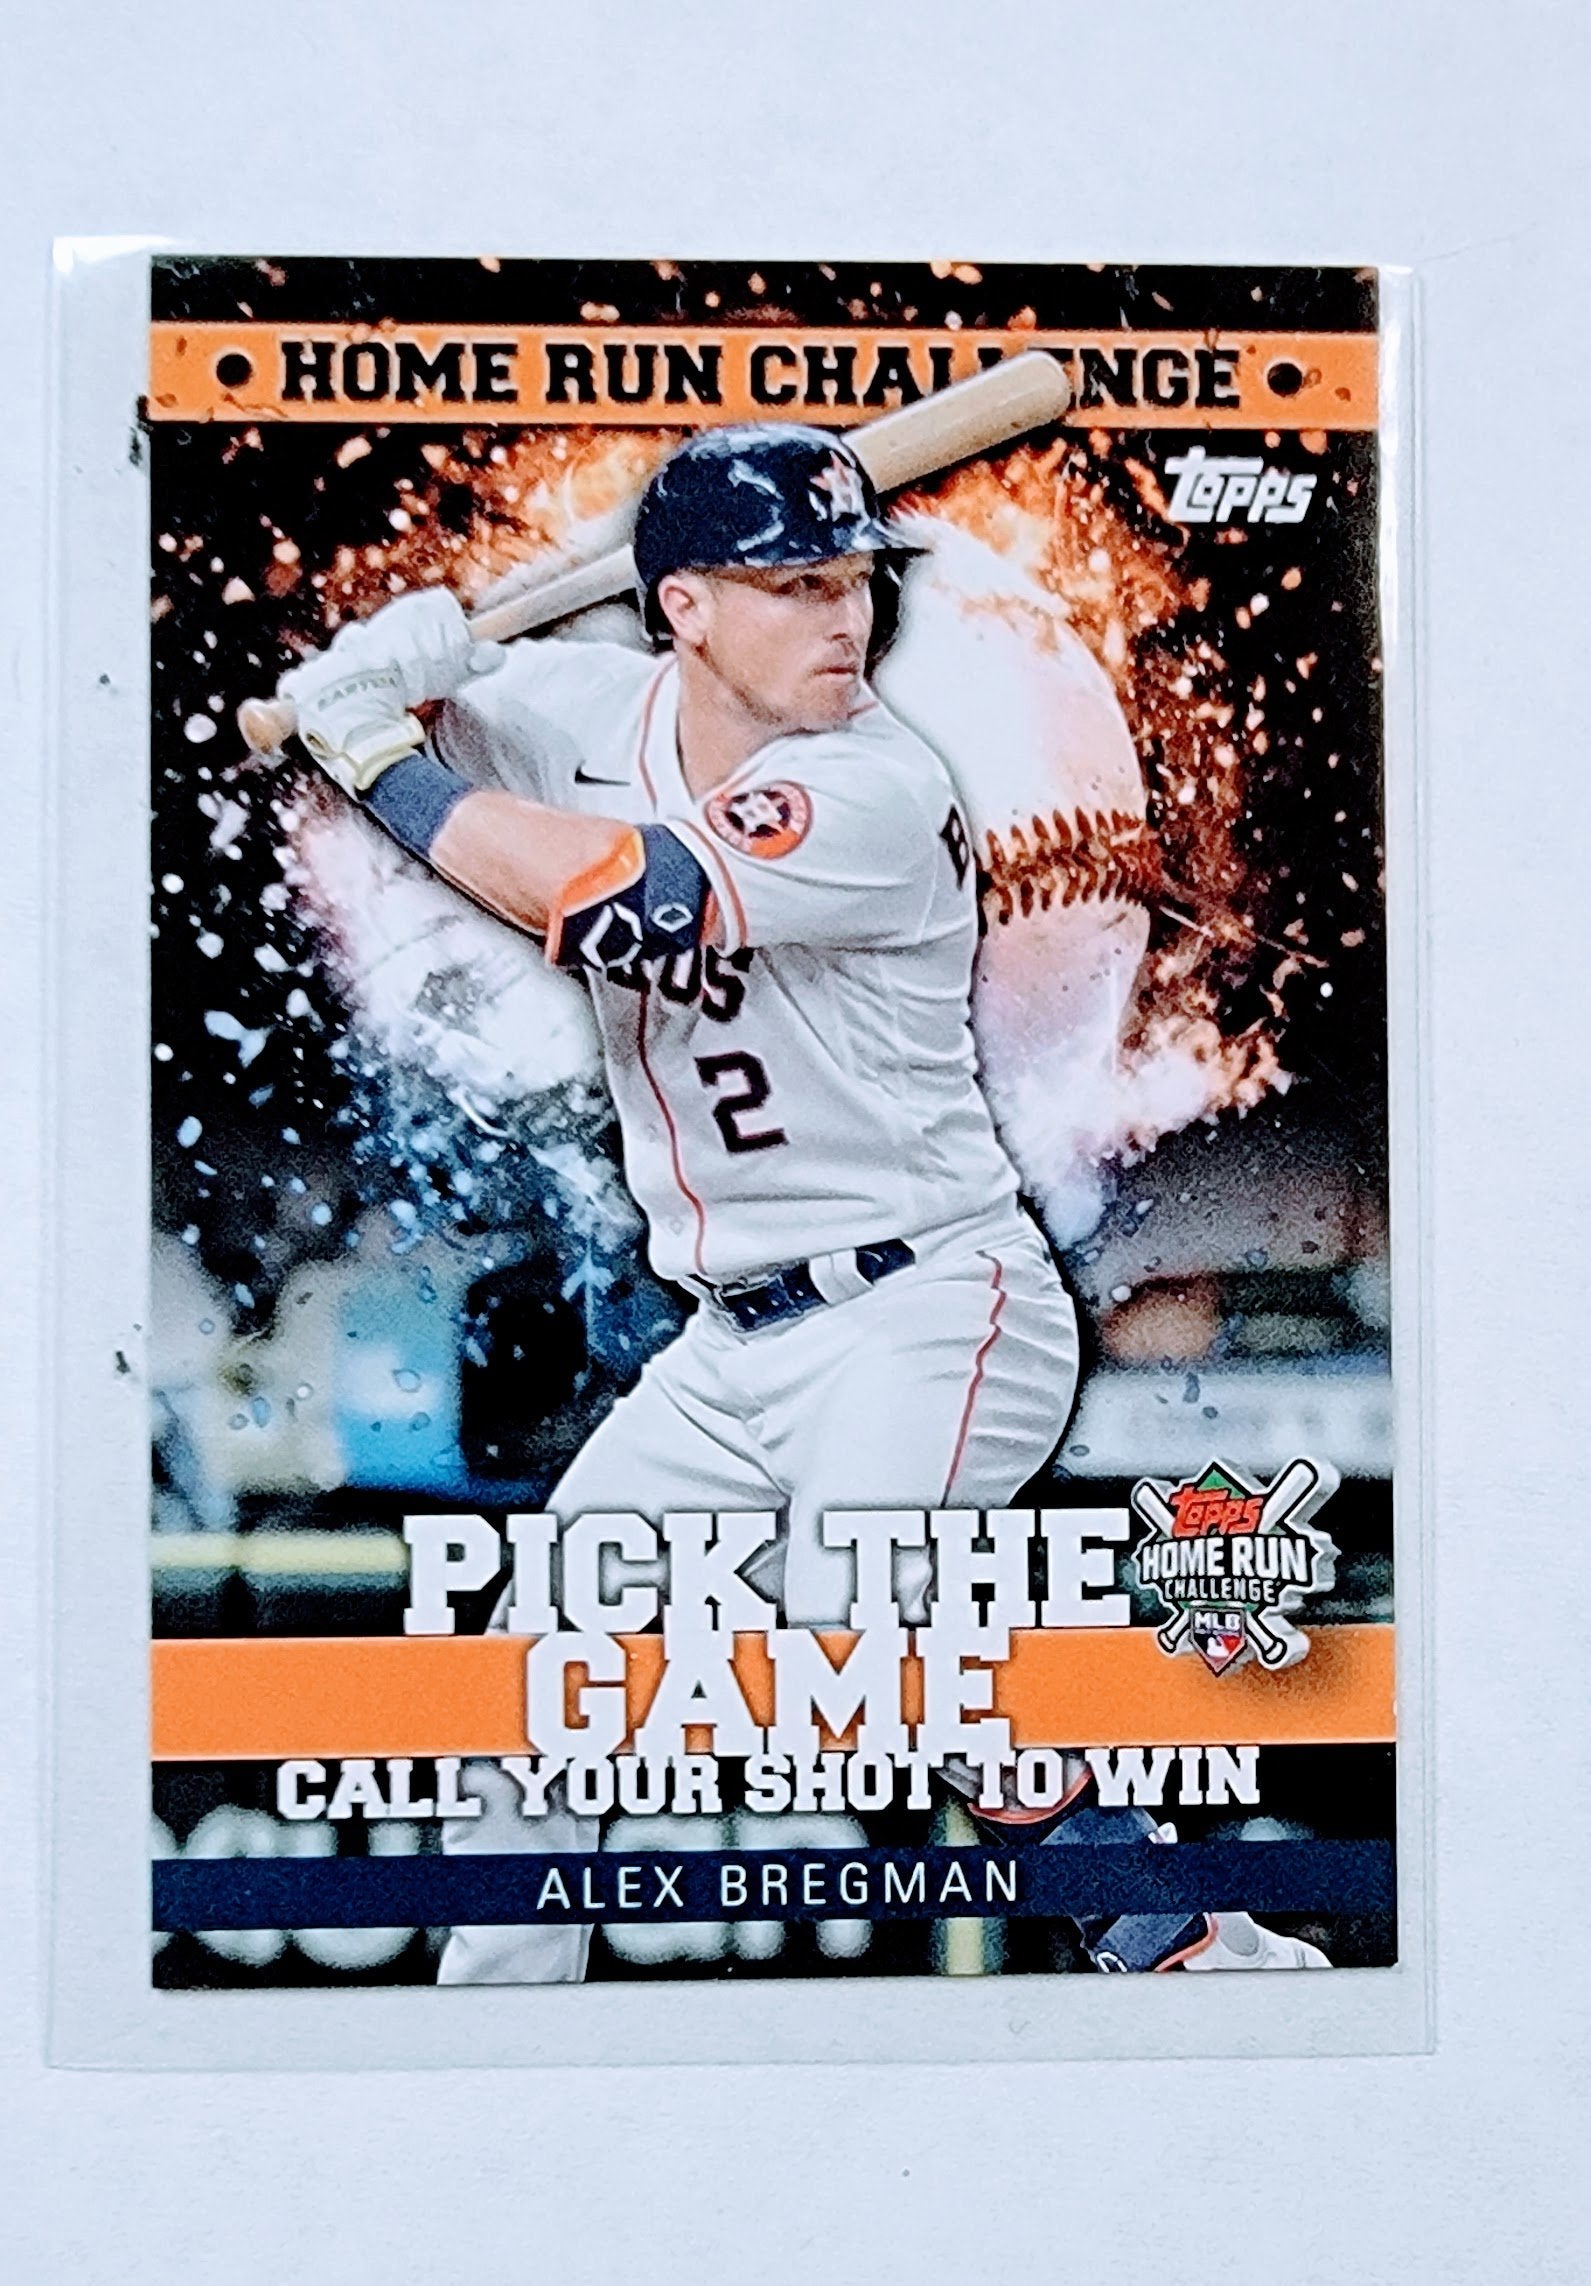 For baseball cards, the game has changed